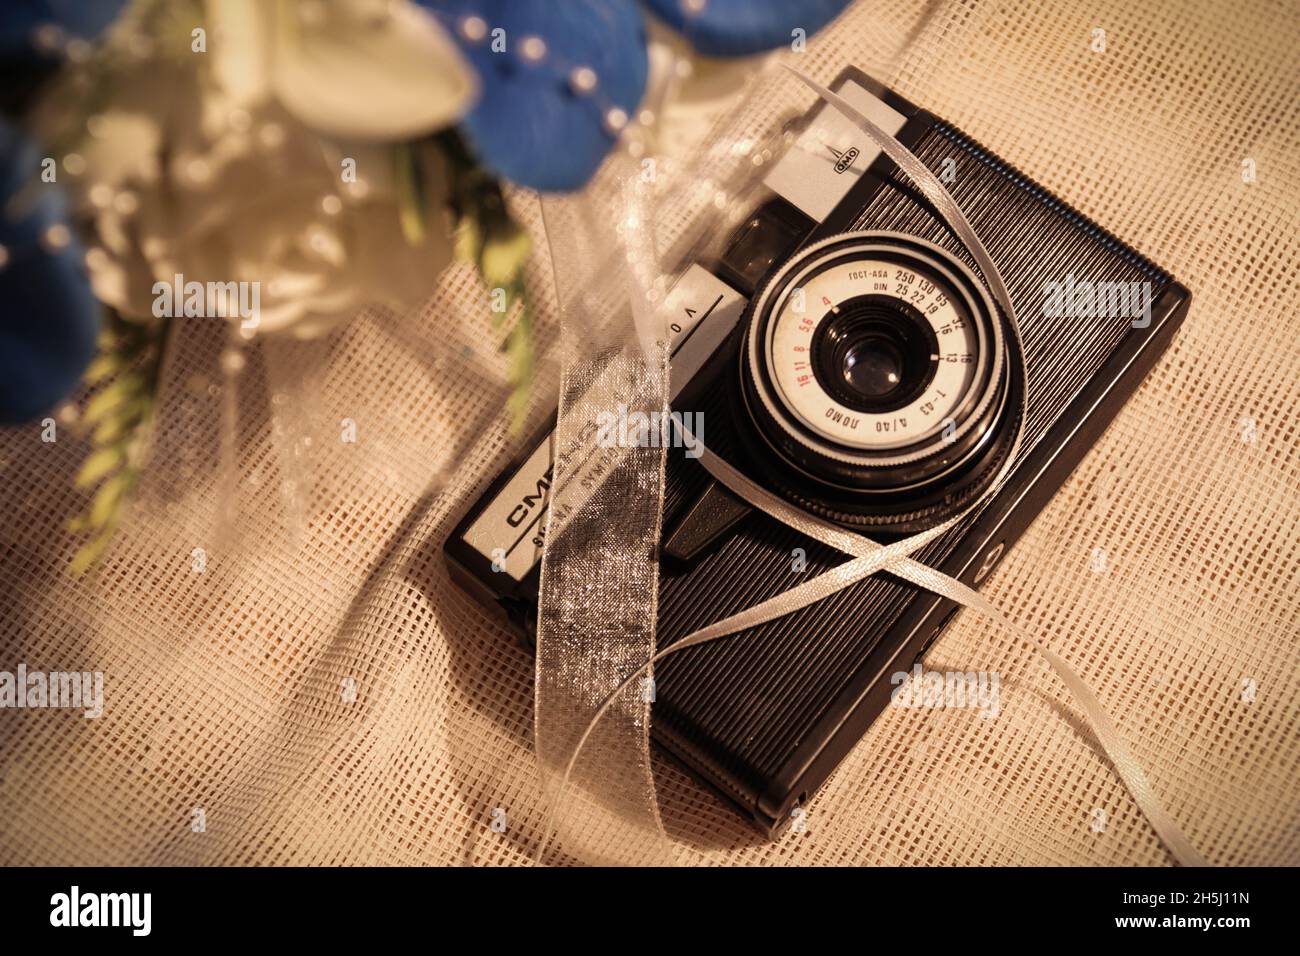 Old camera on a wedding Stock Photo